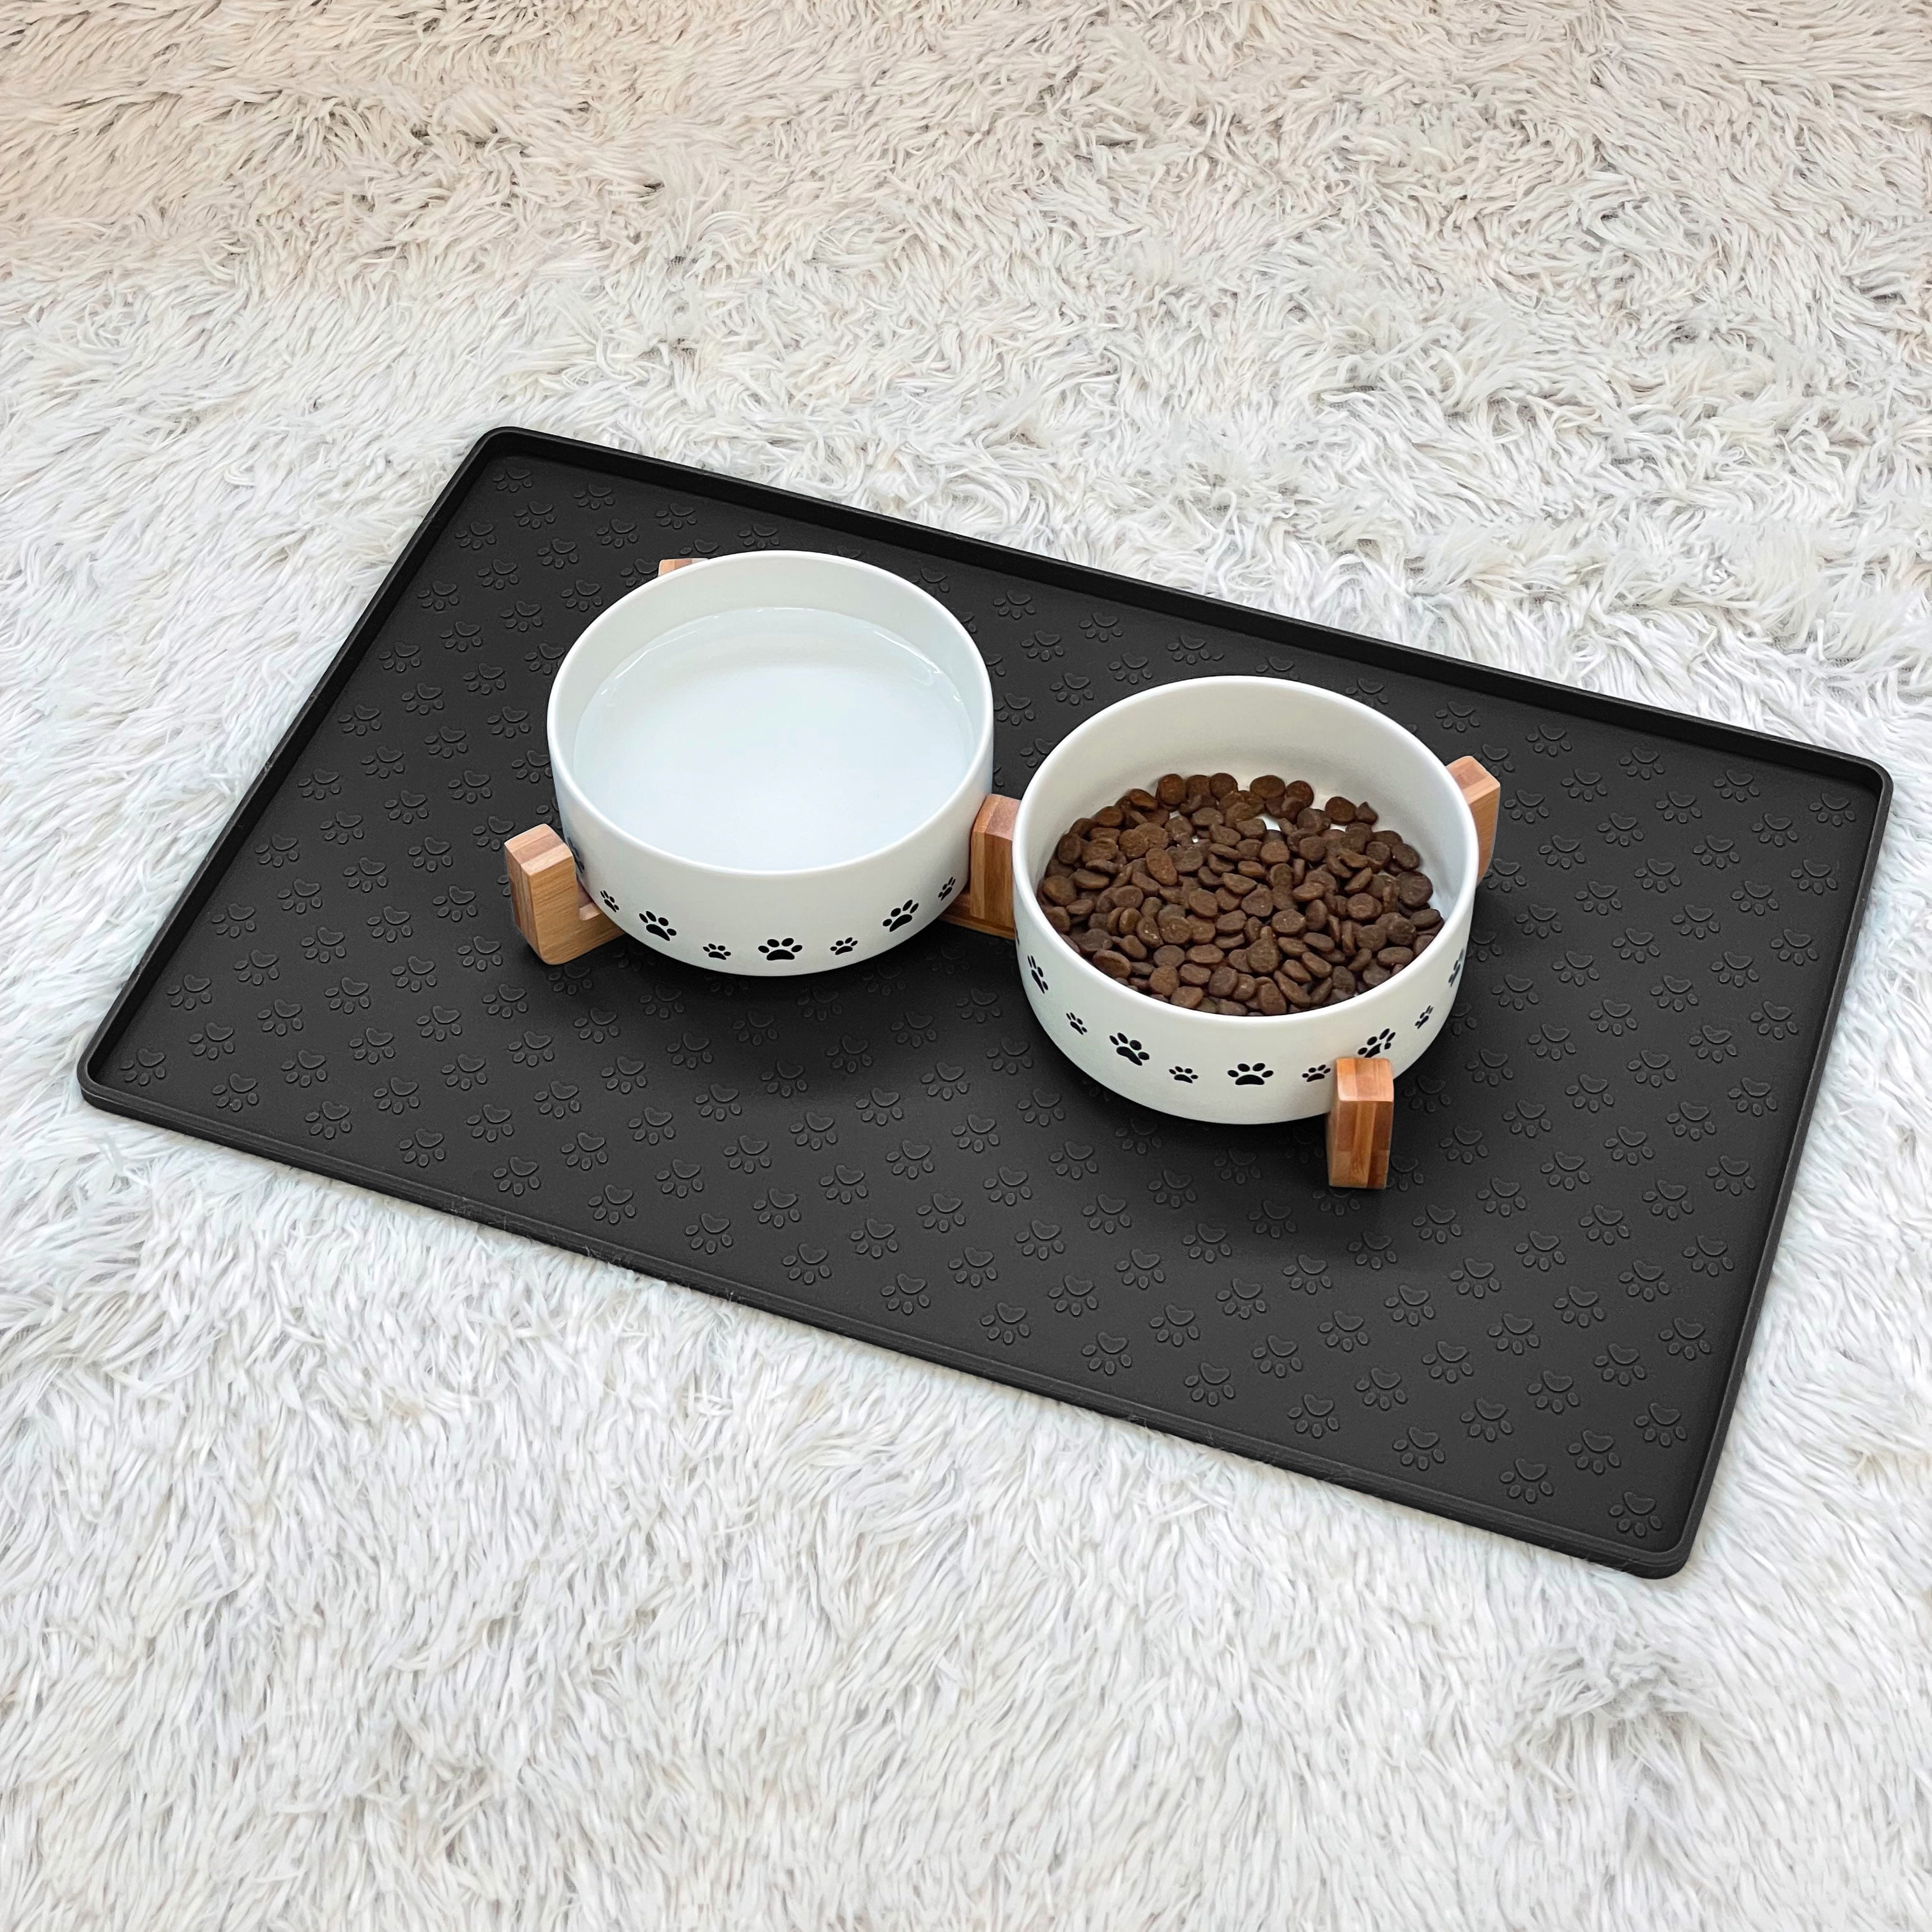 EIOKIT Dog Food Mat,Silicone Waterproof Dog Cat Food Tray,Non Slip Pet Bowl  Mats Placemat,Size:(18.5 x 11.5) 0.6 Raised Edge,Suitable for Most